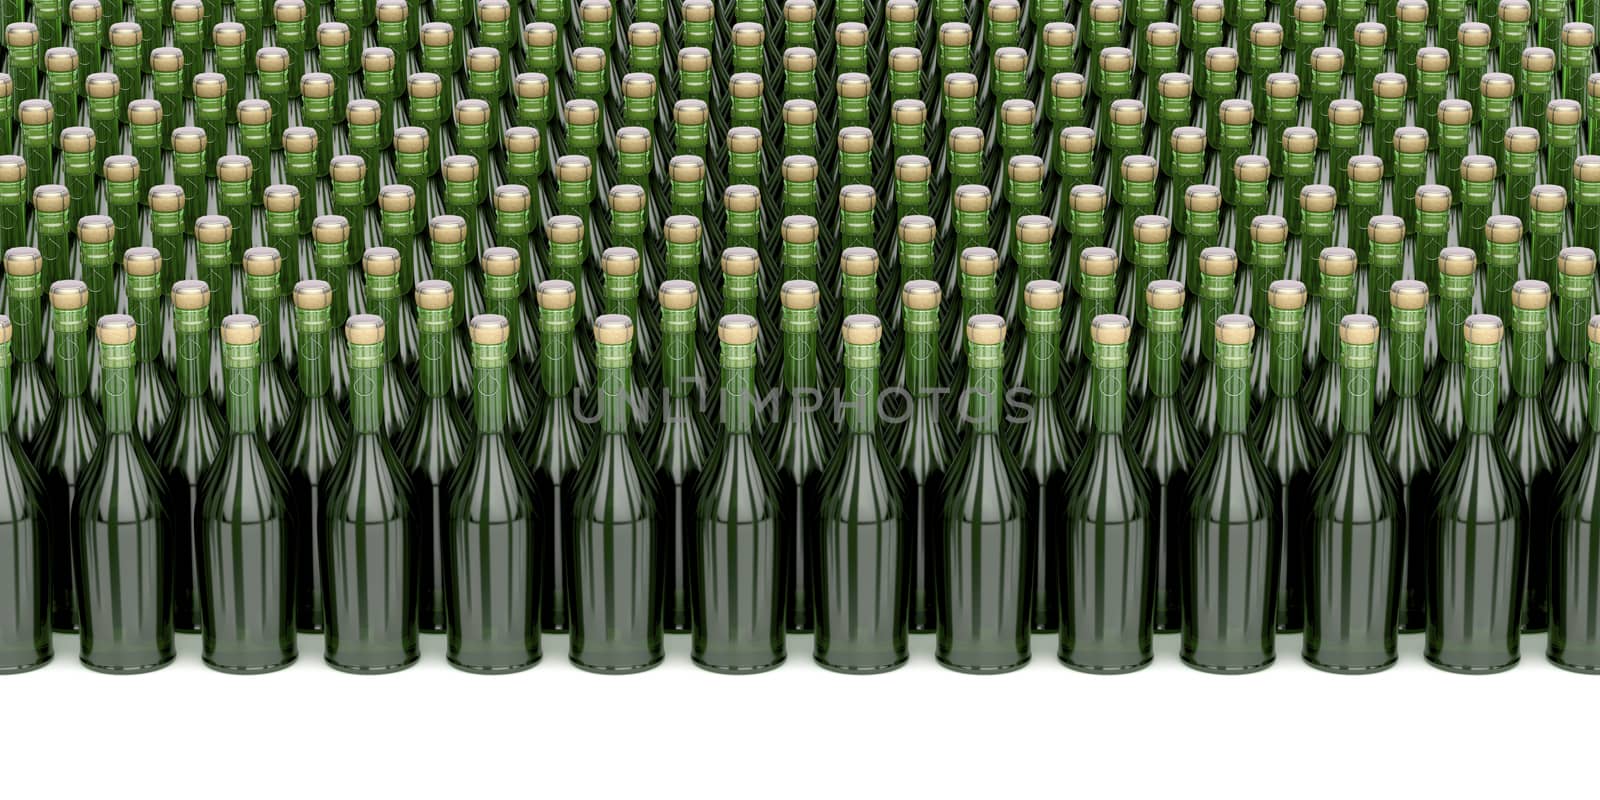 Many champagne bottles by magraphics